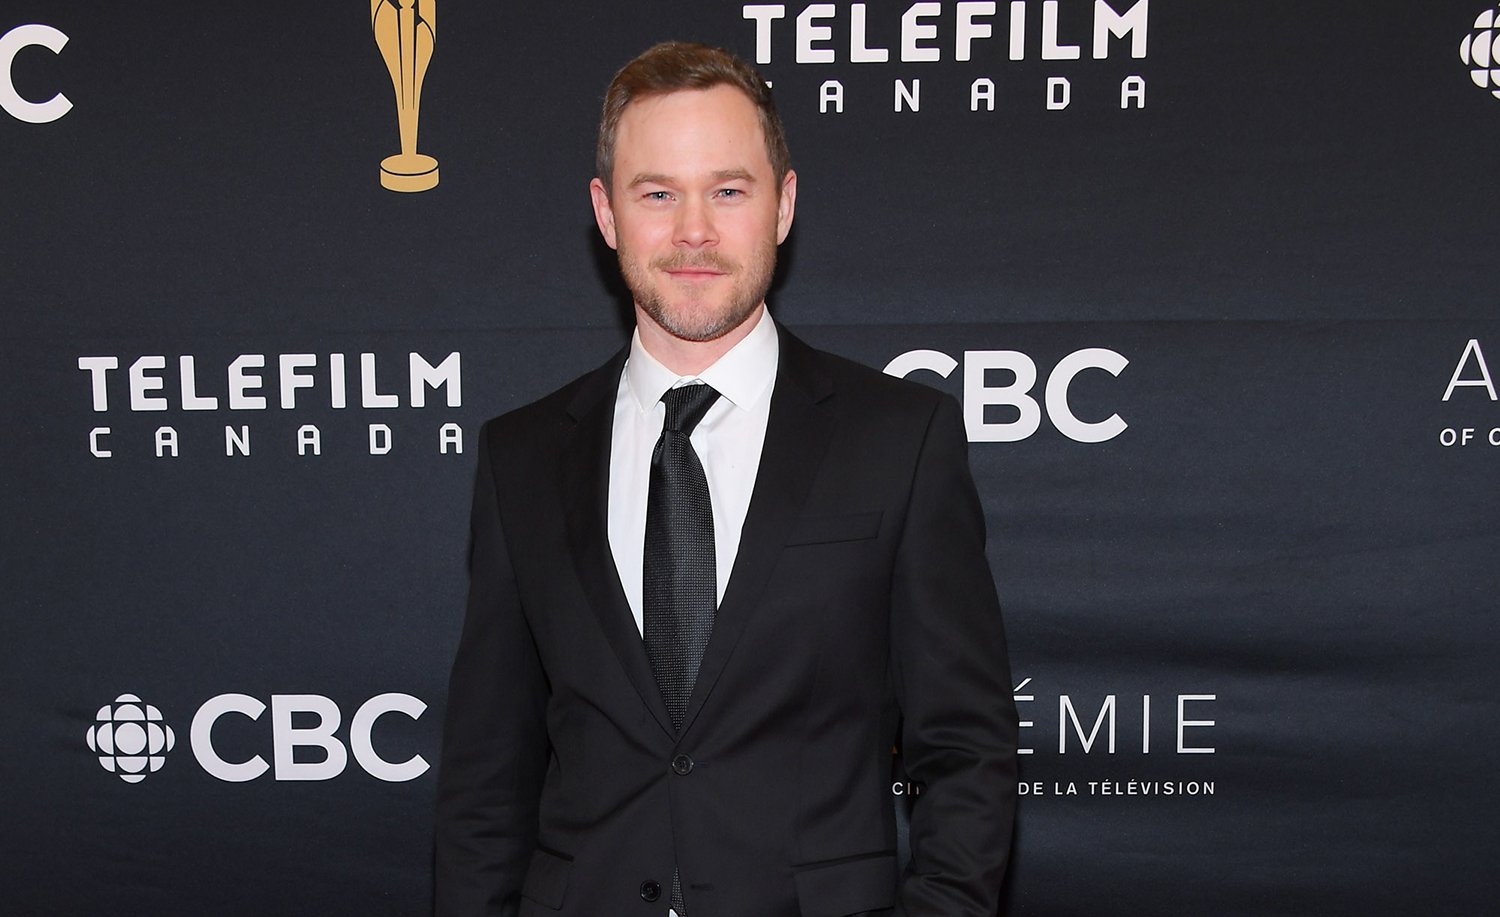 Ginny & Georgia Season 2 Austin's dad Gil actor Aaron Ashmore smiles in a black suit at a red carpet event for the 2019 Canadian Screen Awards Broadcast Gala